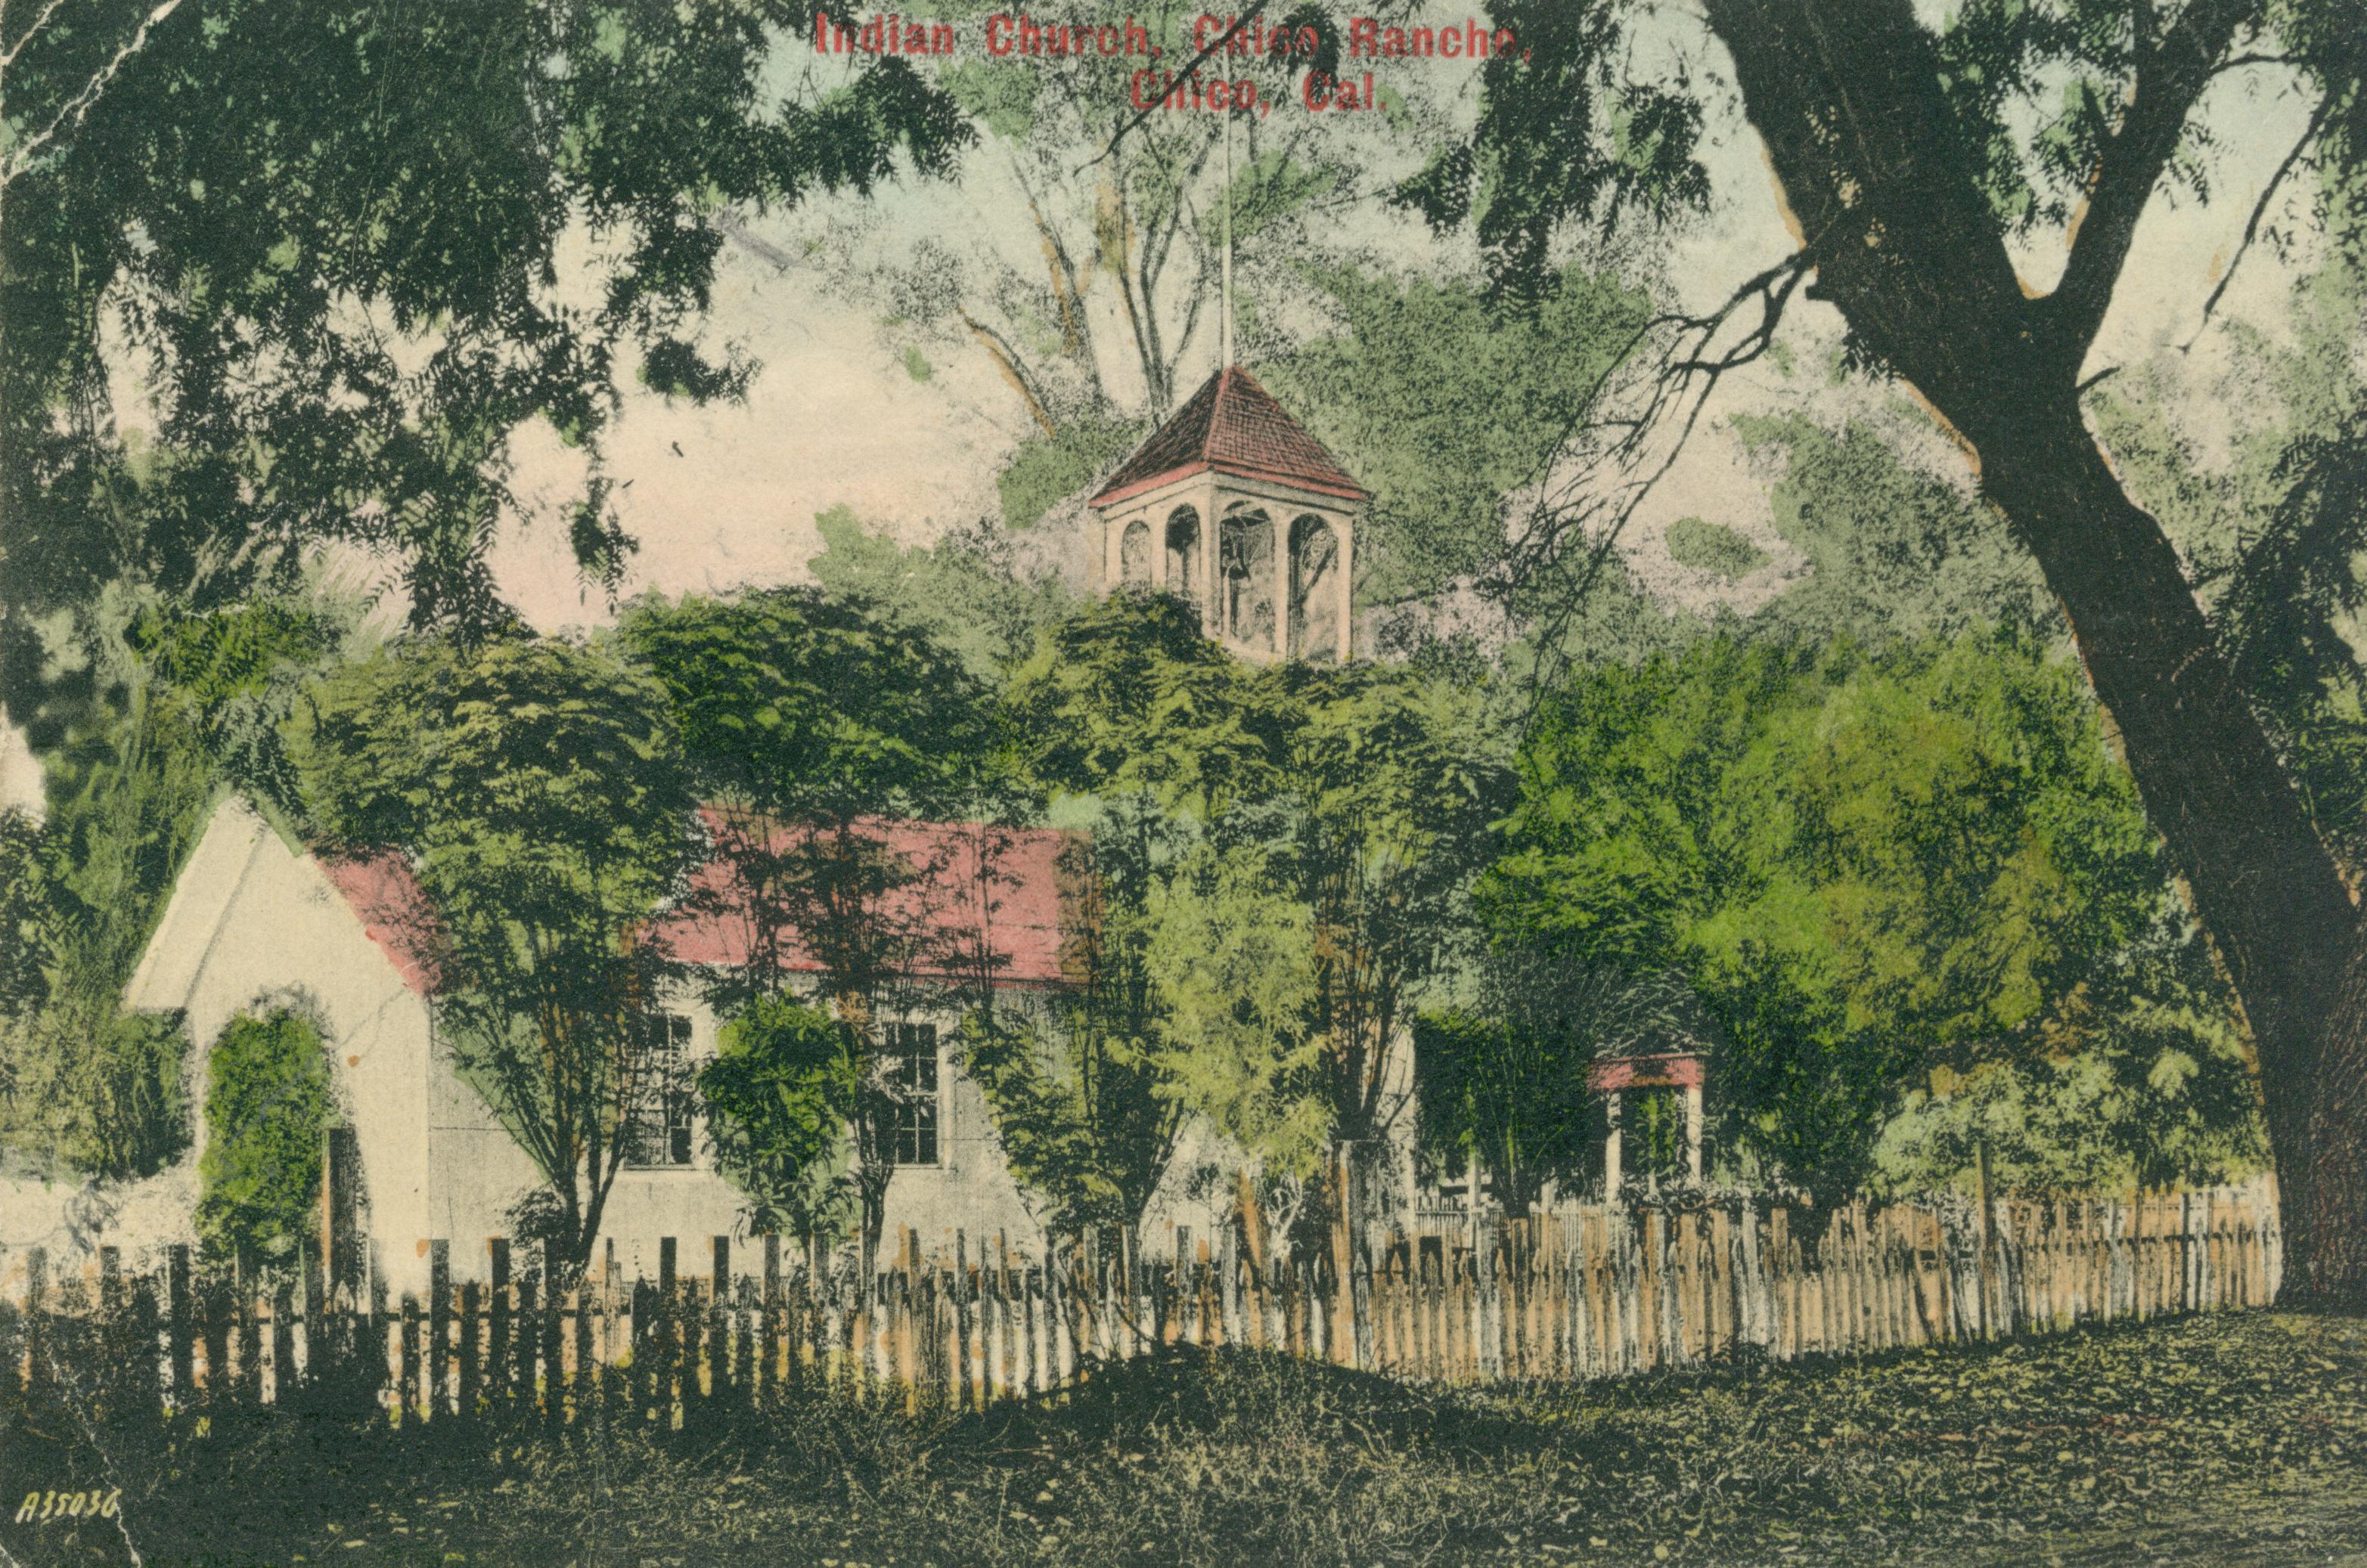 Shows a church surrounded by a picket fence and shaded by trees